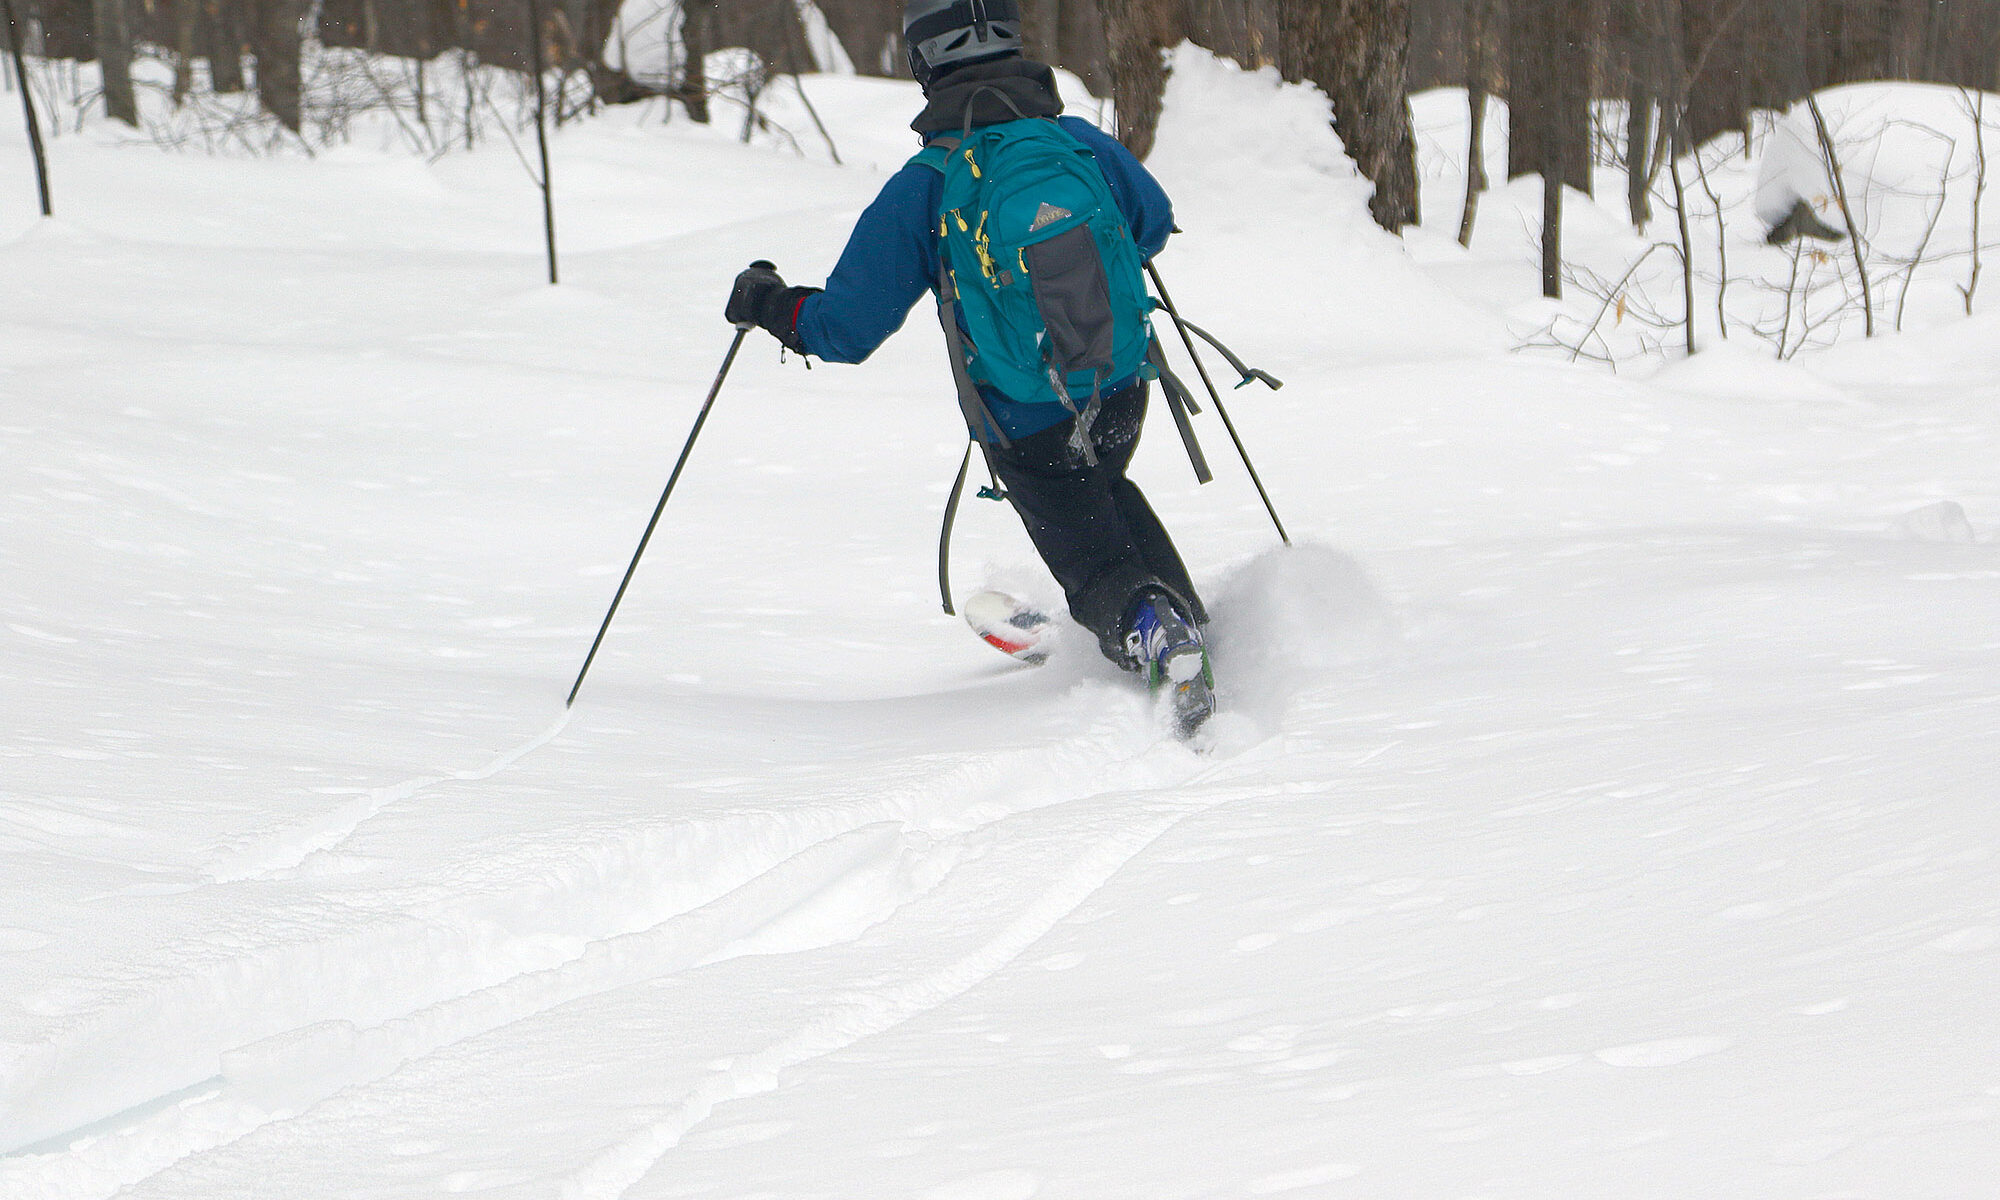 An image of Erica skiing out through powder in the trees below the Buchanan Shelter in the backcountry at Bolton Valley Ski Resort in Vermont